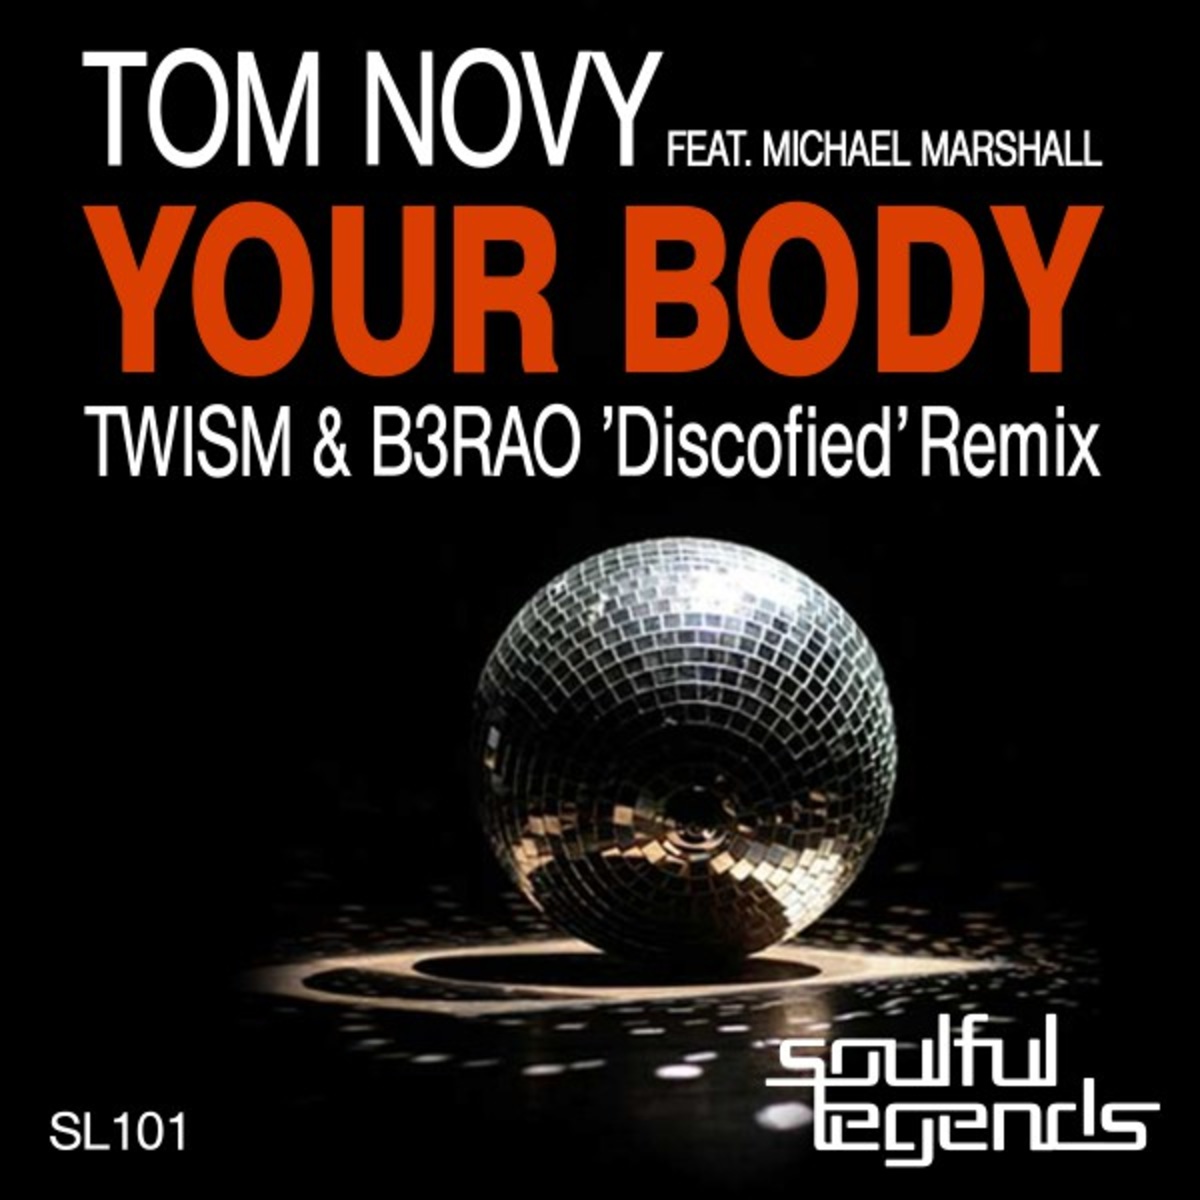 Tom Novy ft Michael Marshall - Your Body (Twism & B3RAO 'Discofied' Remix) / Soulful Legends